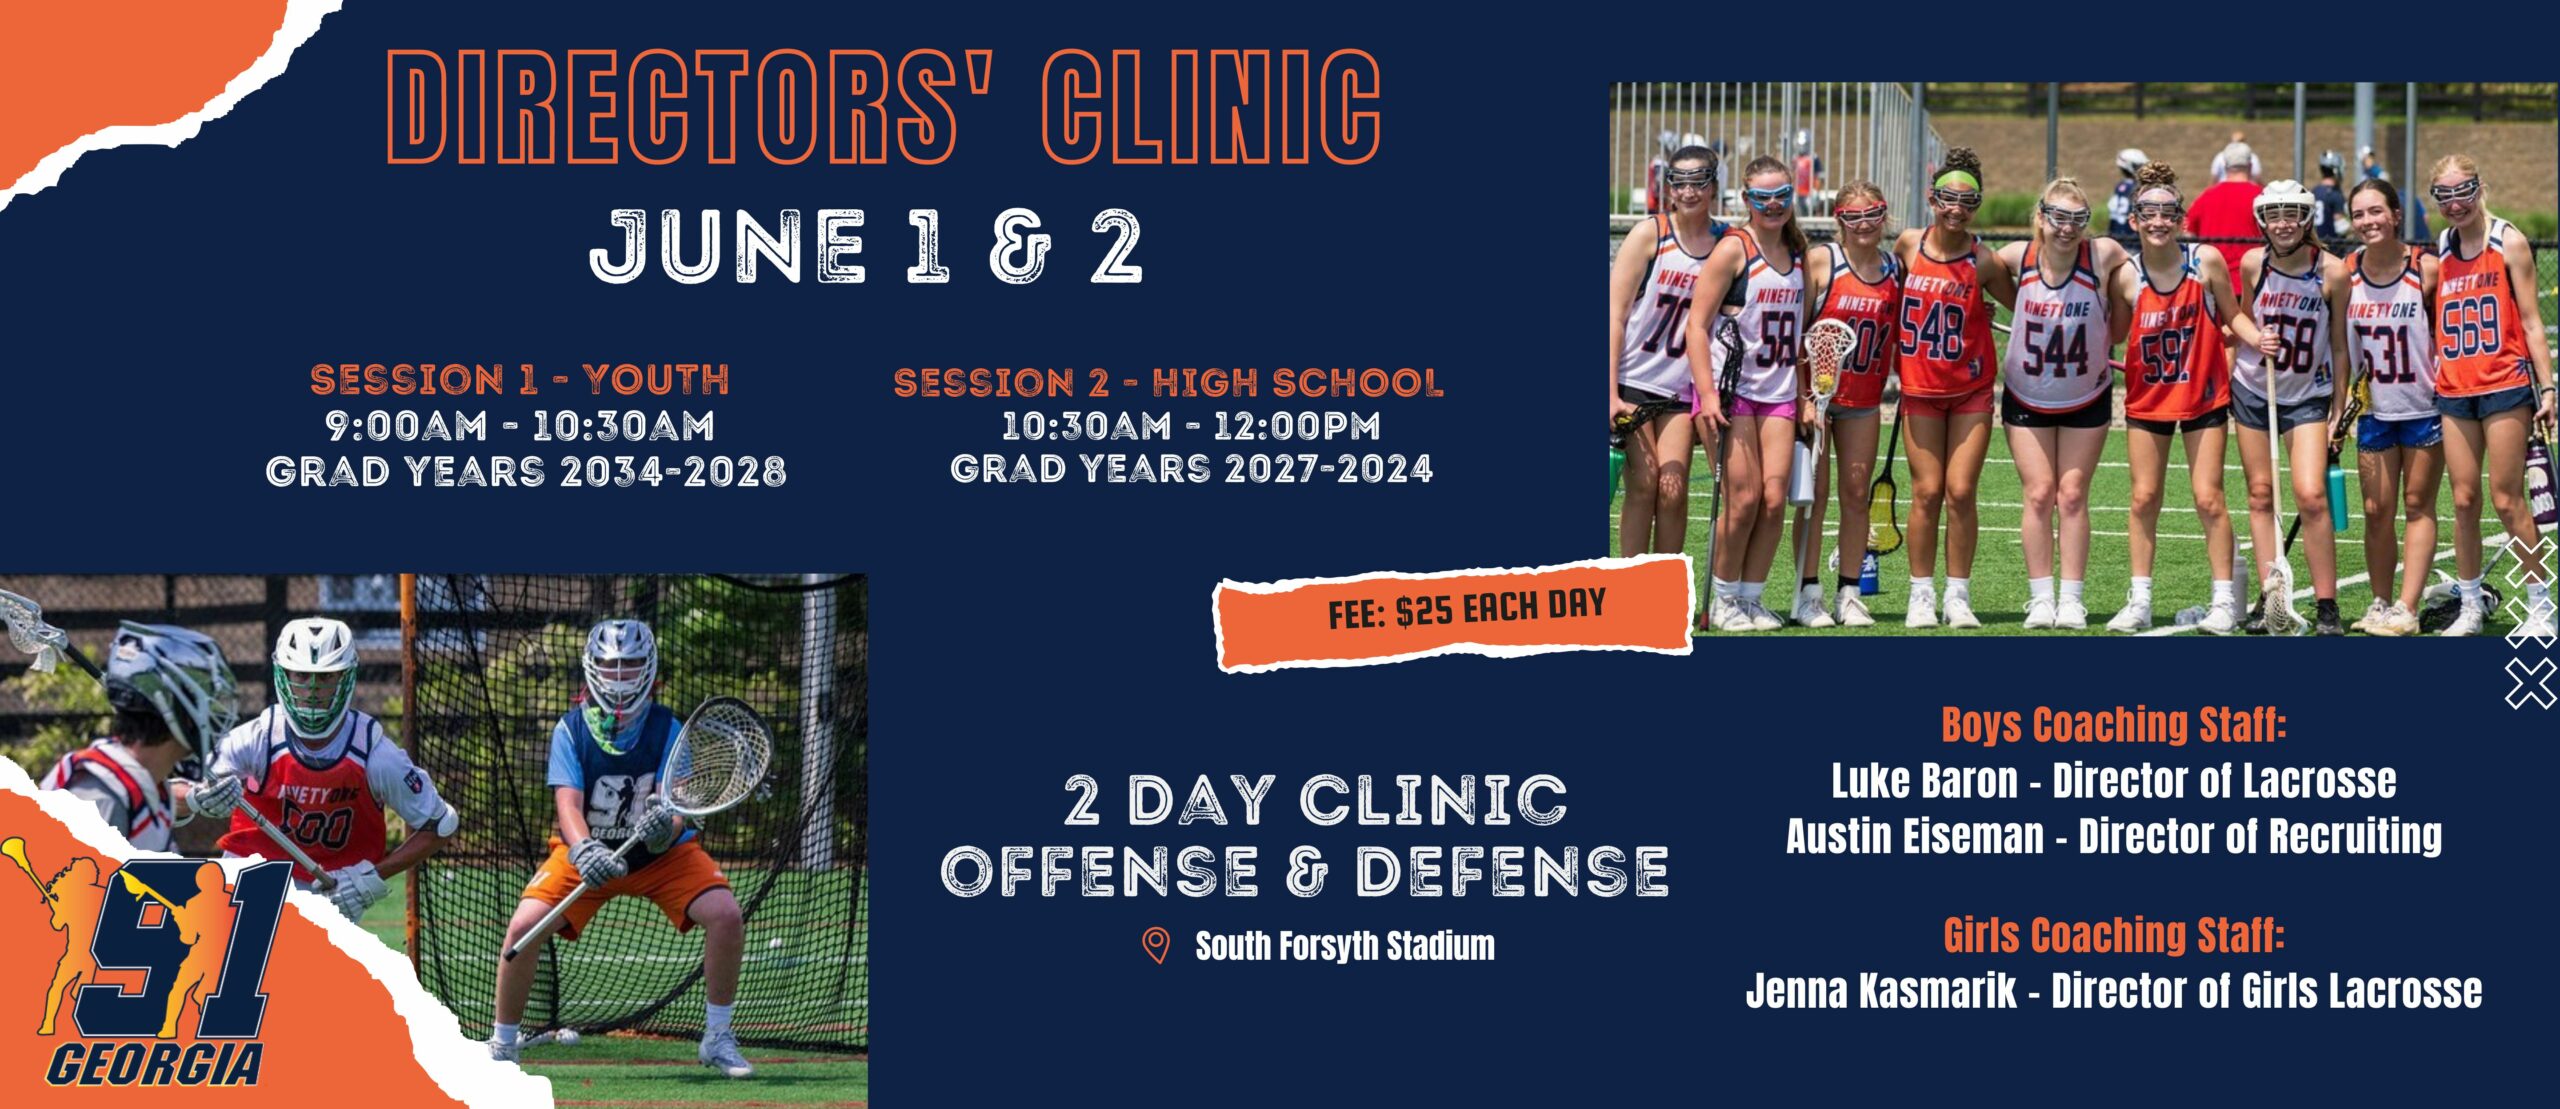 June 1 &#038; 2 &#8211; Directors&#8217; Clinic at South Forsyth Stadium